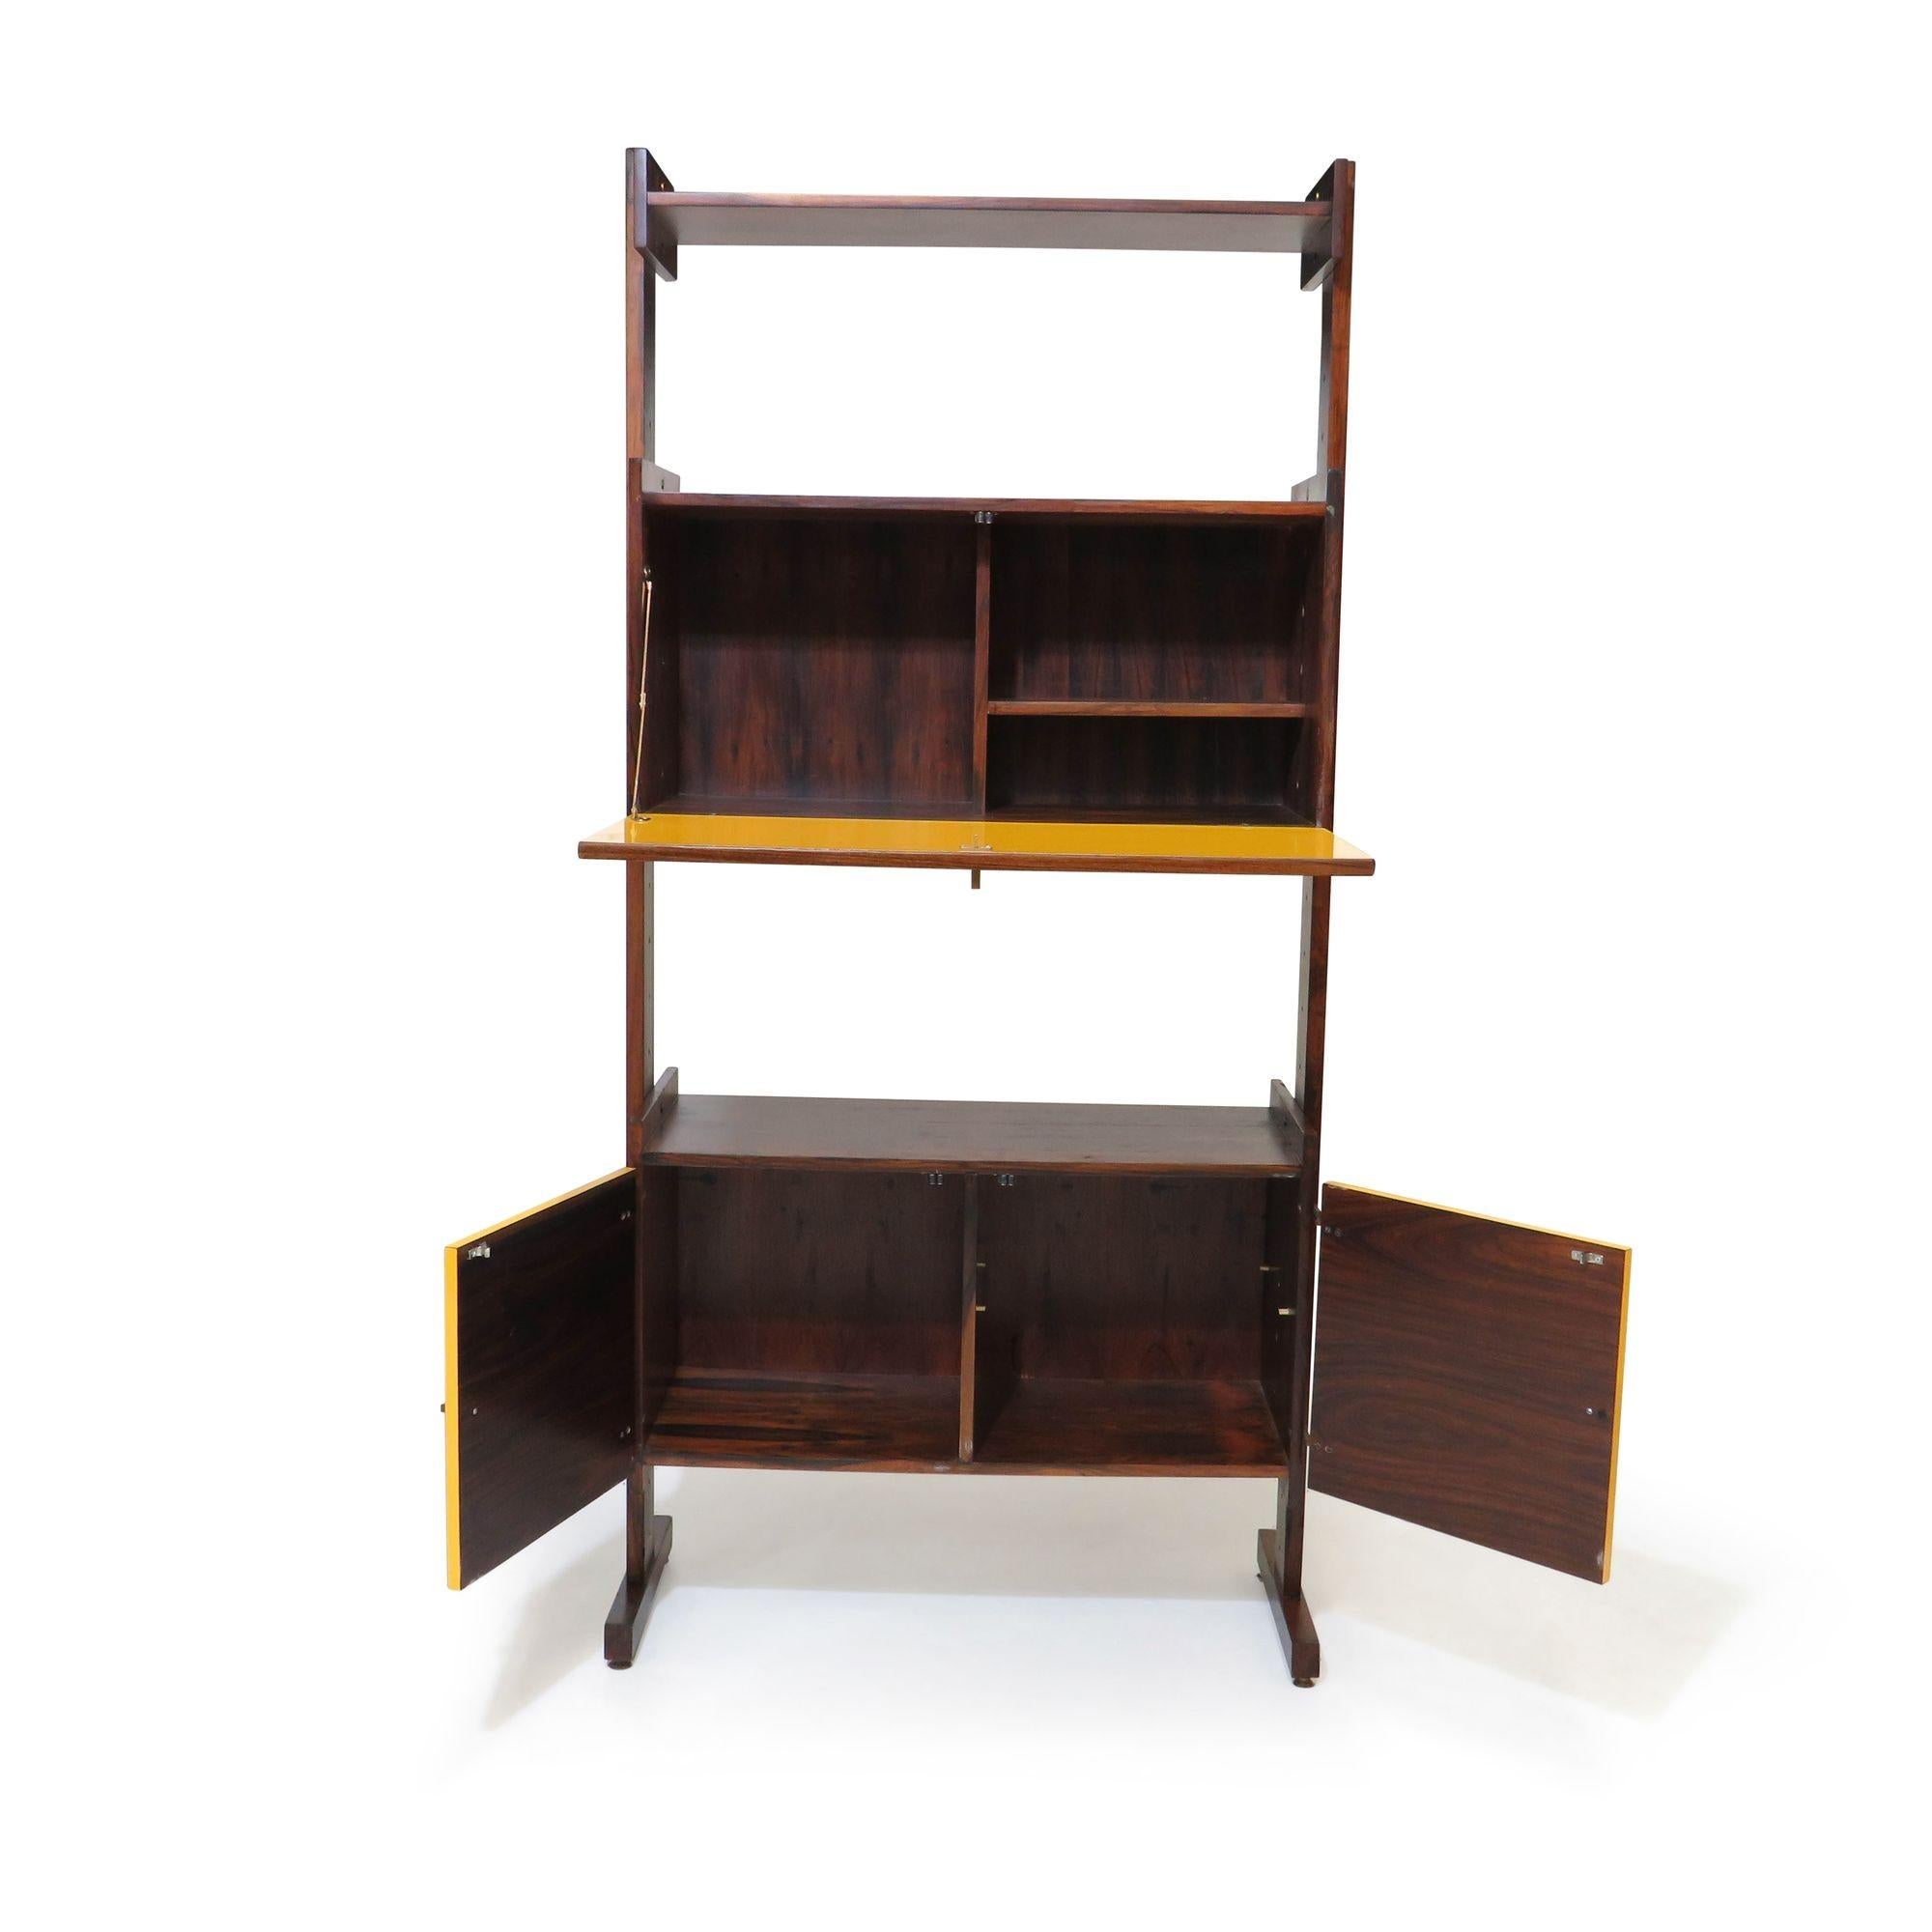 Brazil Rosewood Room Divider Bookcase or Wall Unit in Yellow 3